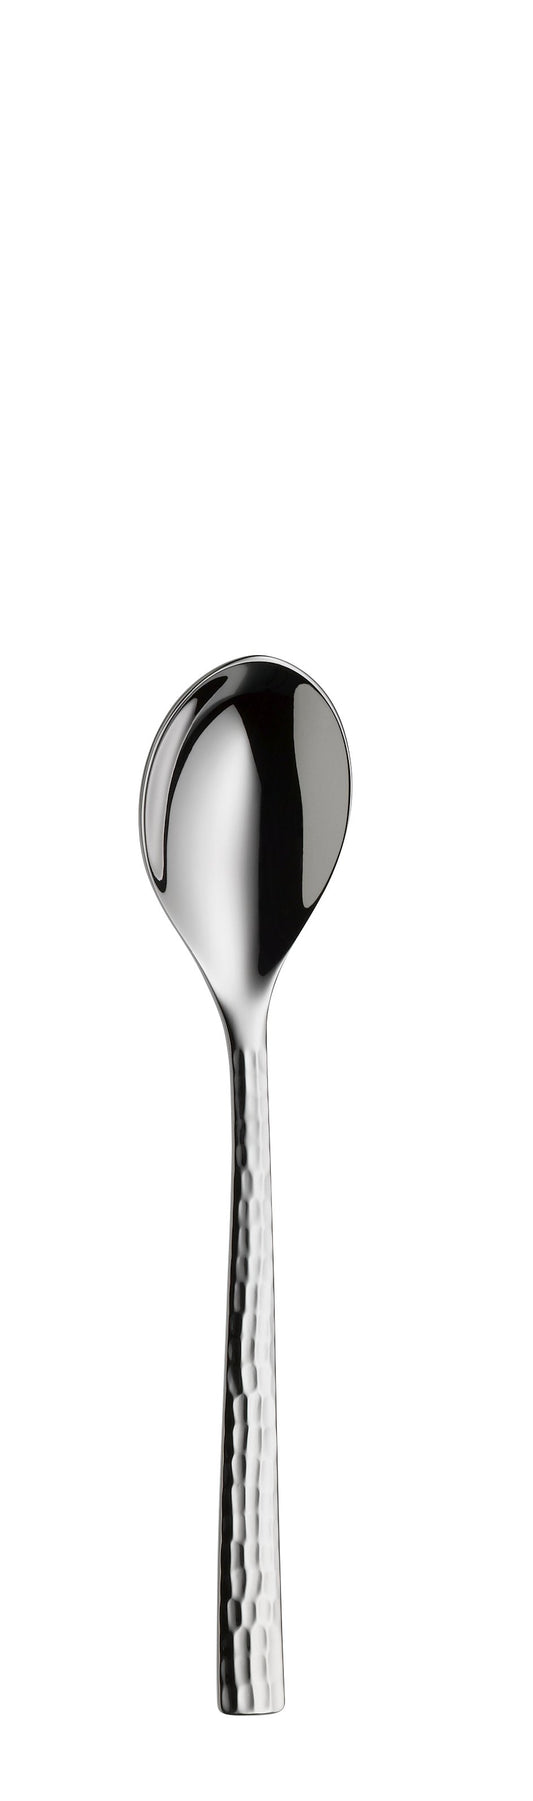 Coffee/tea spoon large LENISTA silver plated 159mm